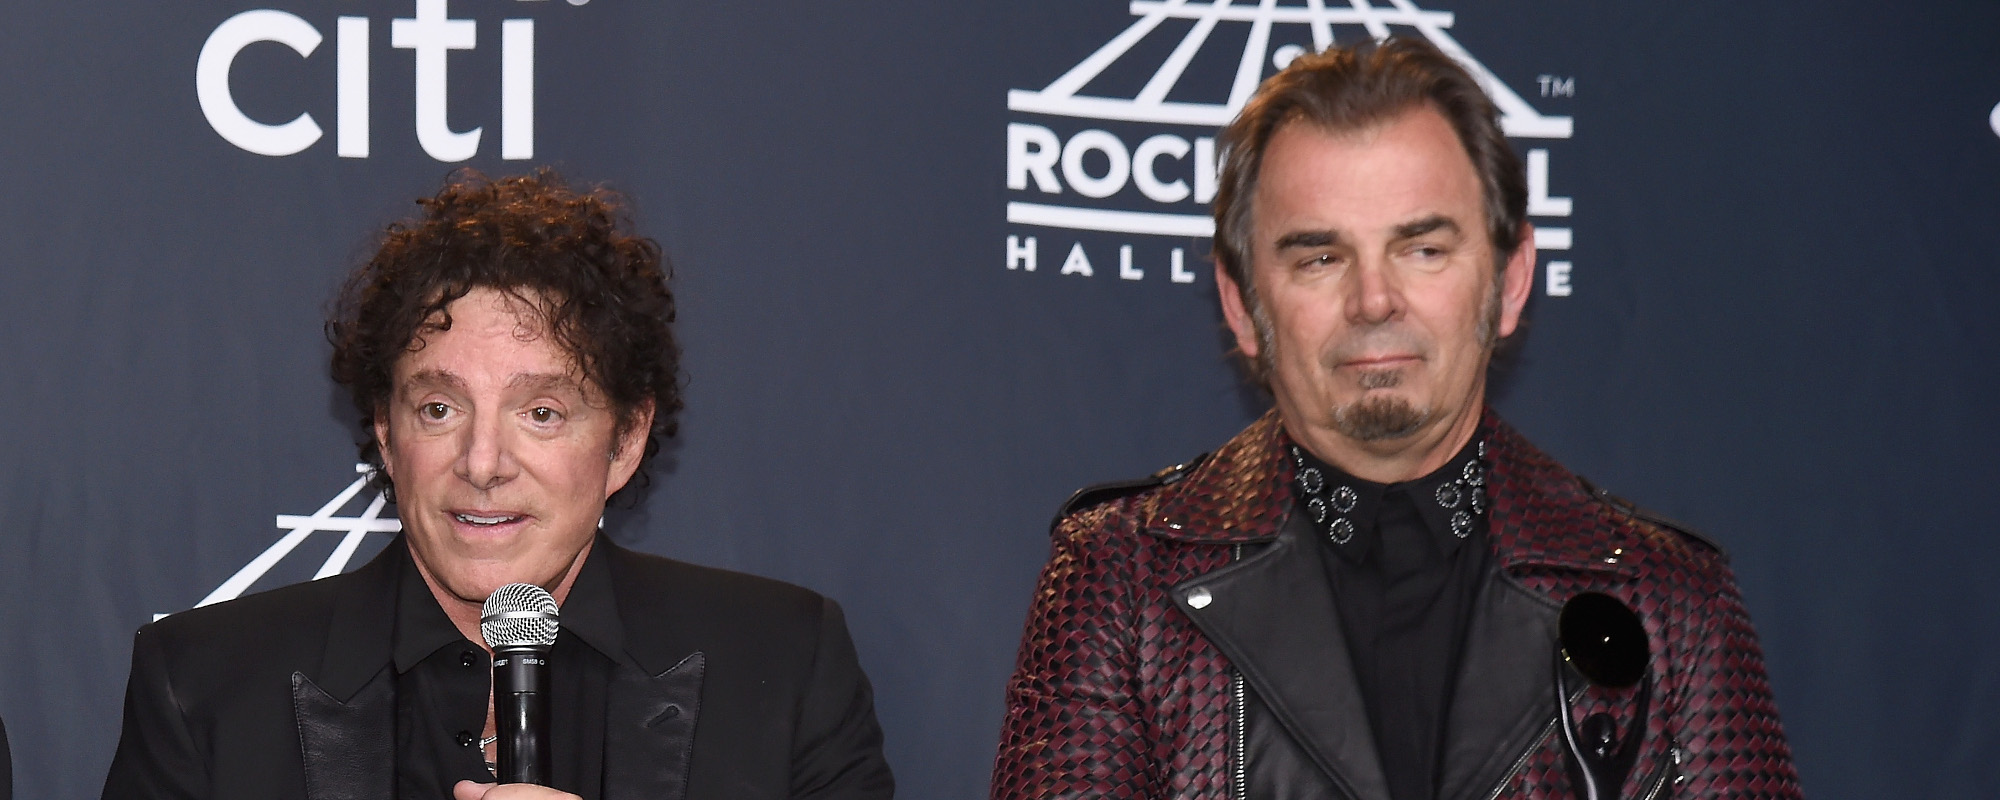 Journey Band Members Jonathan Cain and Neil Schon Face Off in Court Over Credit Card Use